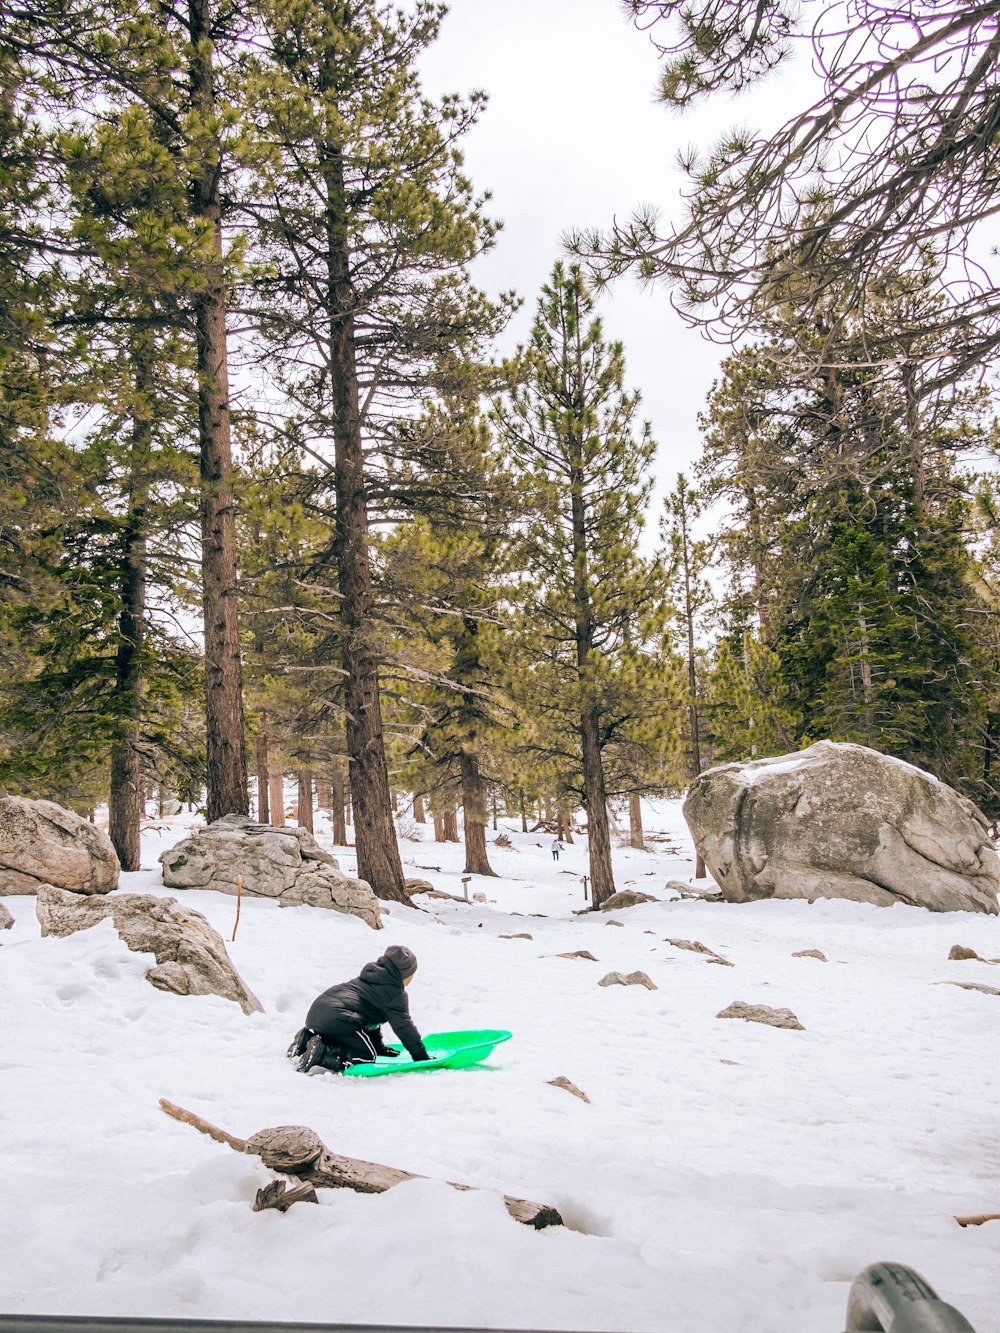 a person sitting in the snow with a surfboard